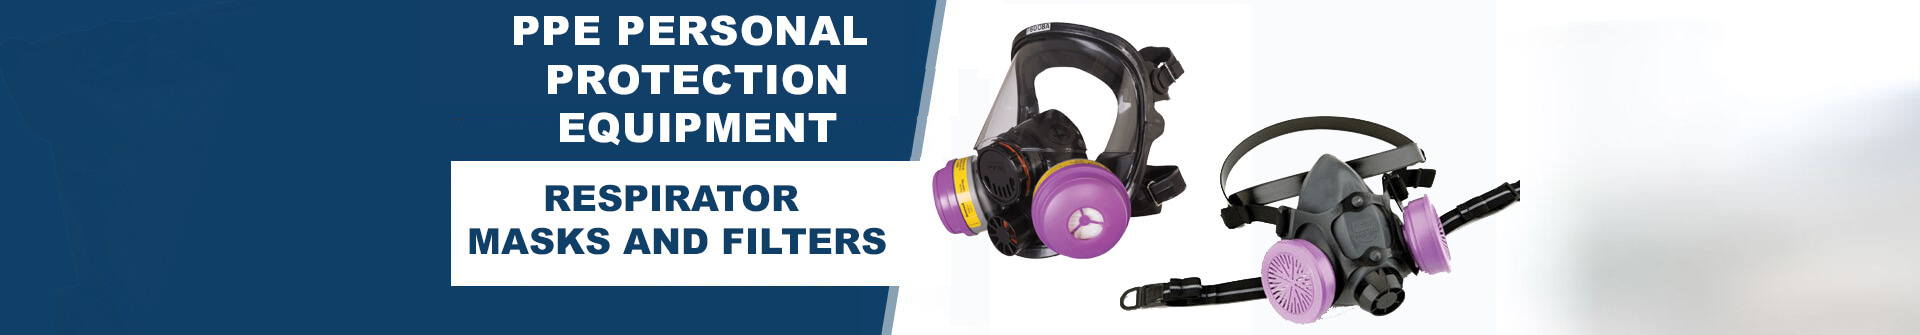 Personal Protection Equipment   -  Respirator Masks and Filters